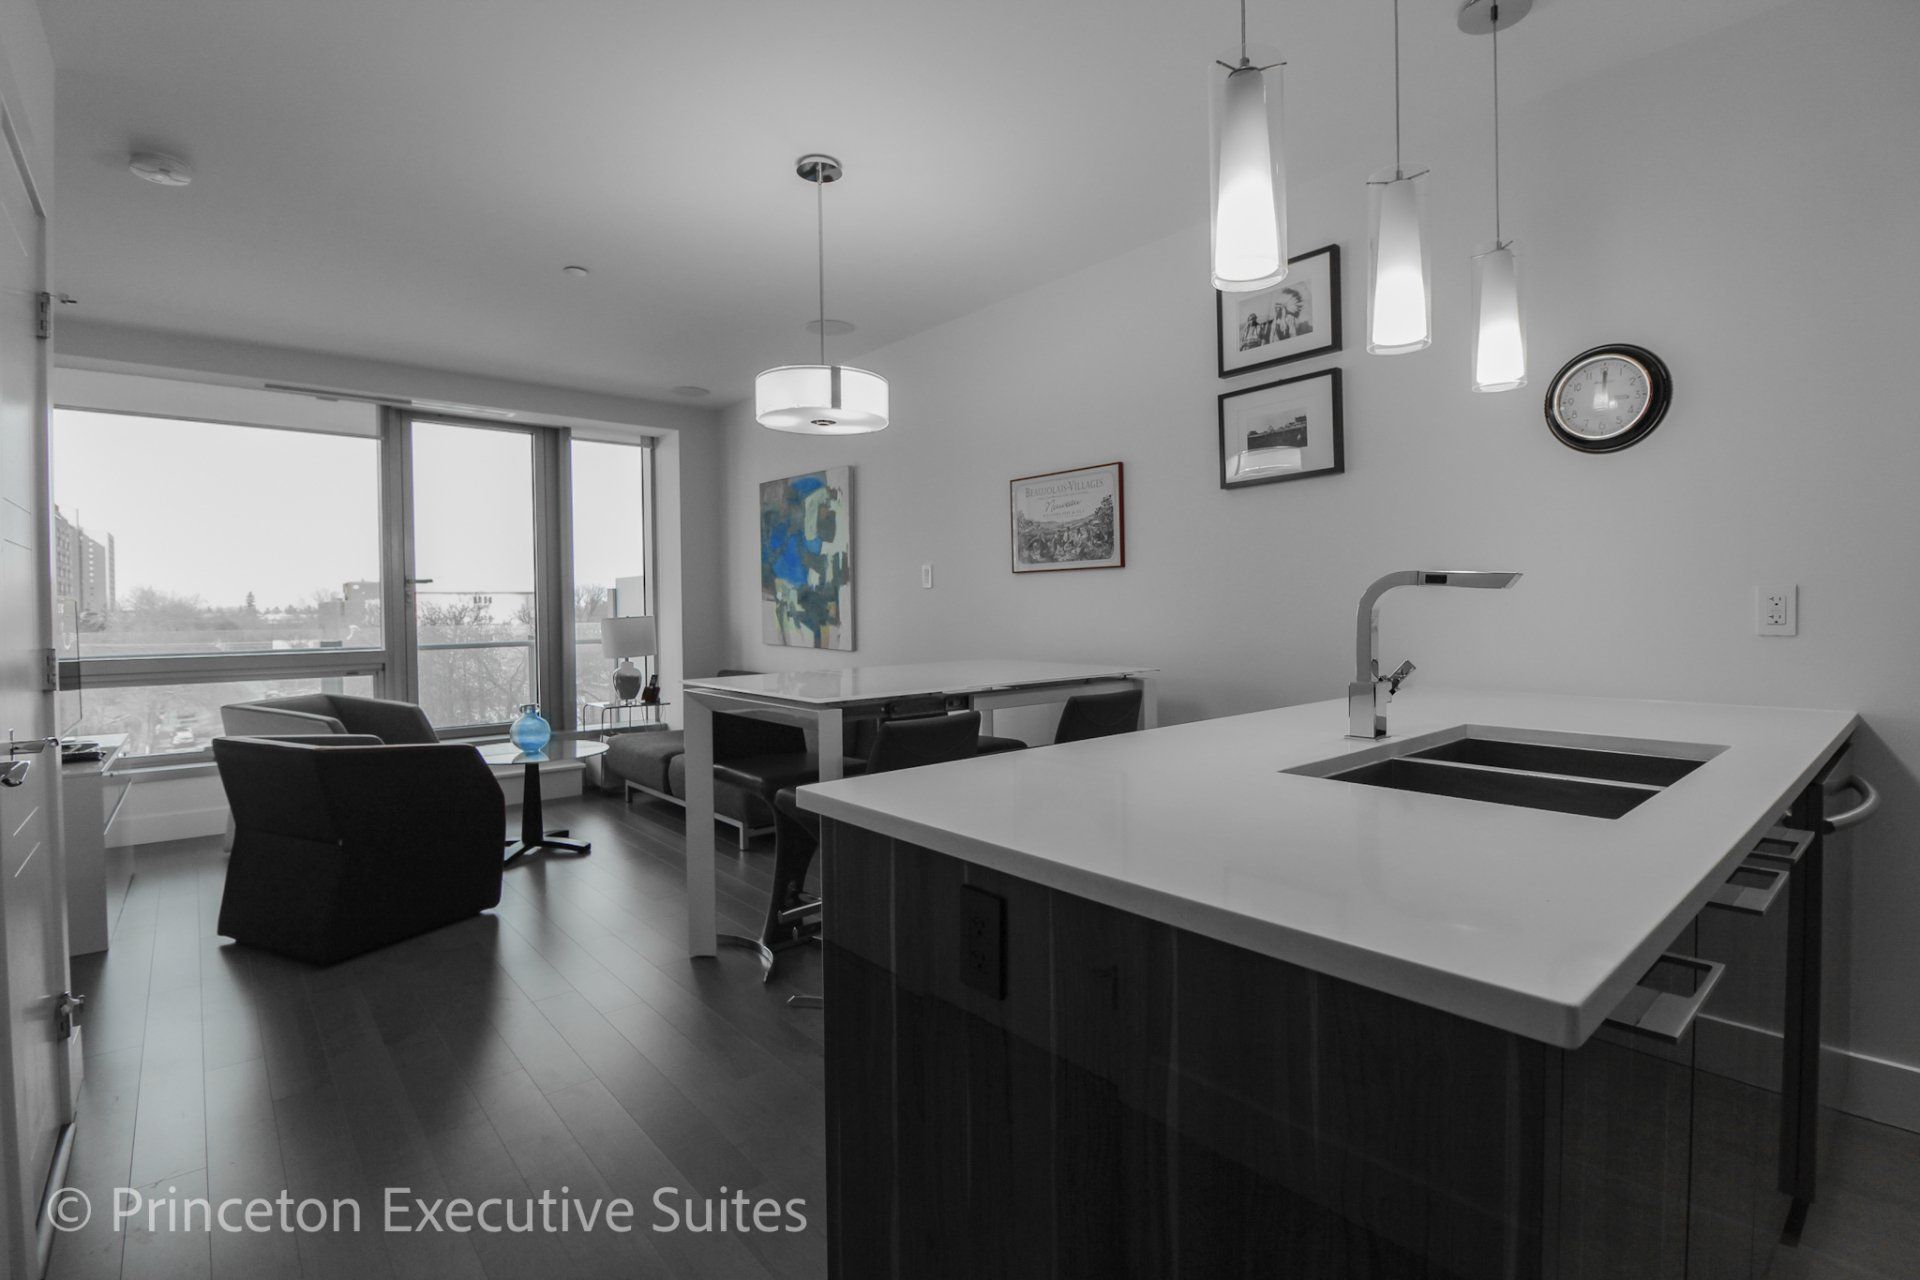 Edmonton executive suite with white quartz counter top  Modern fixtures and white glass dining table.   Ceiling to floor windows in front of a grey and black living room set